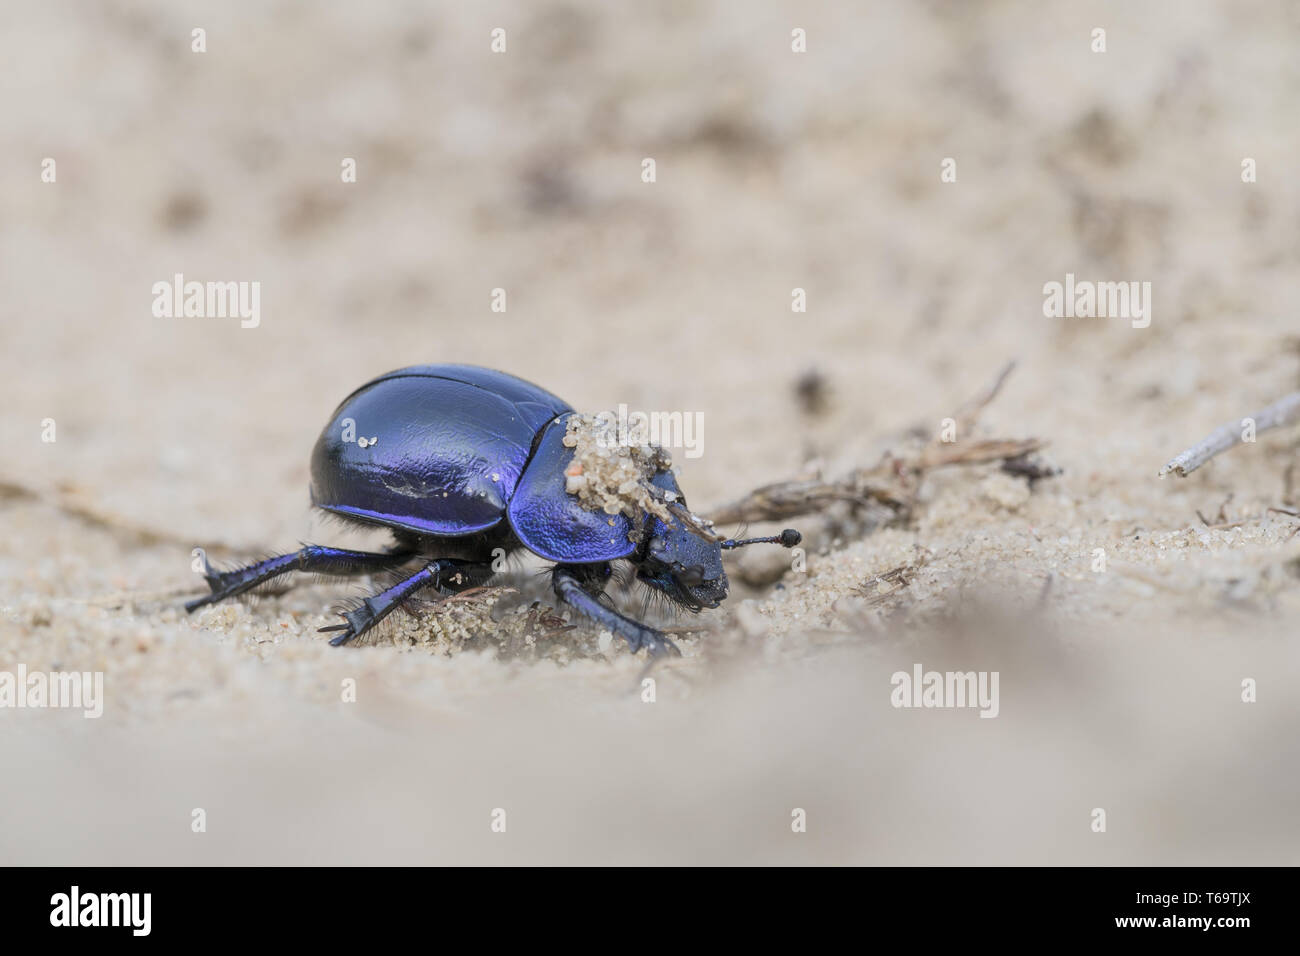 Earth-boring dung beetle, Trypocopris vernalis Stock Photo